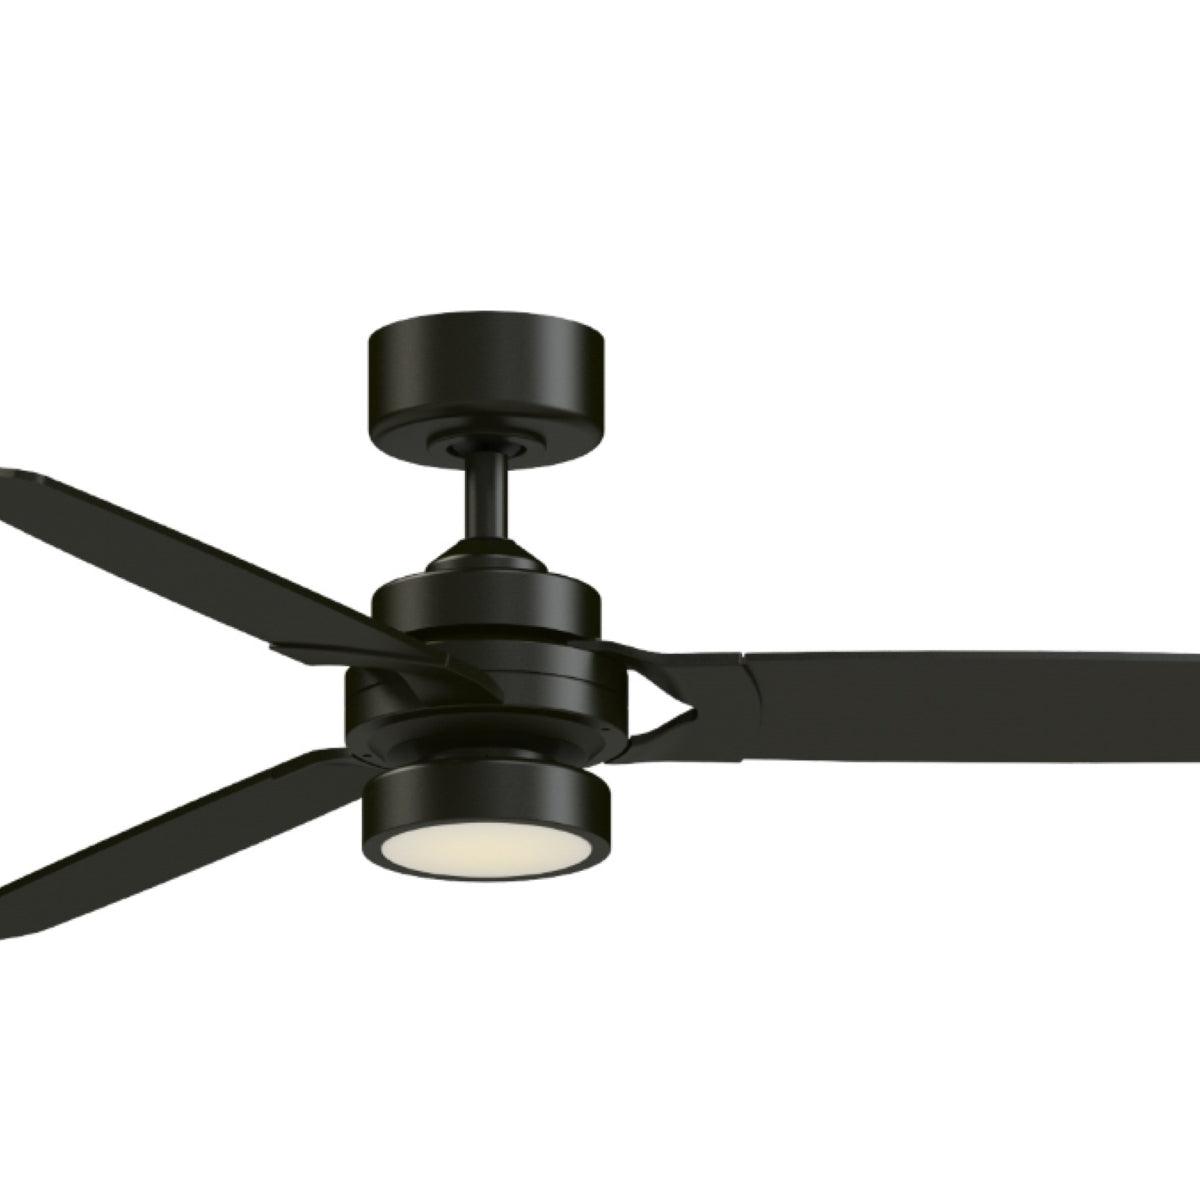 Amped 52 Inch Propeller Ceiling Fan With Light and Remote